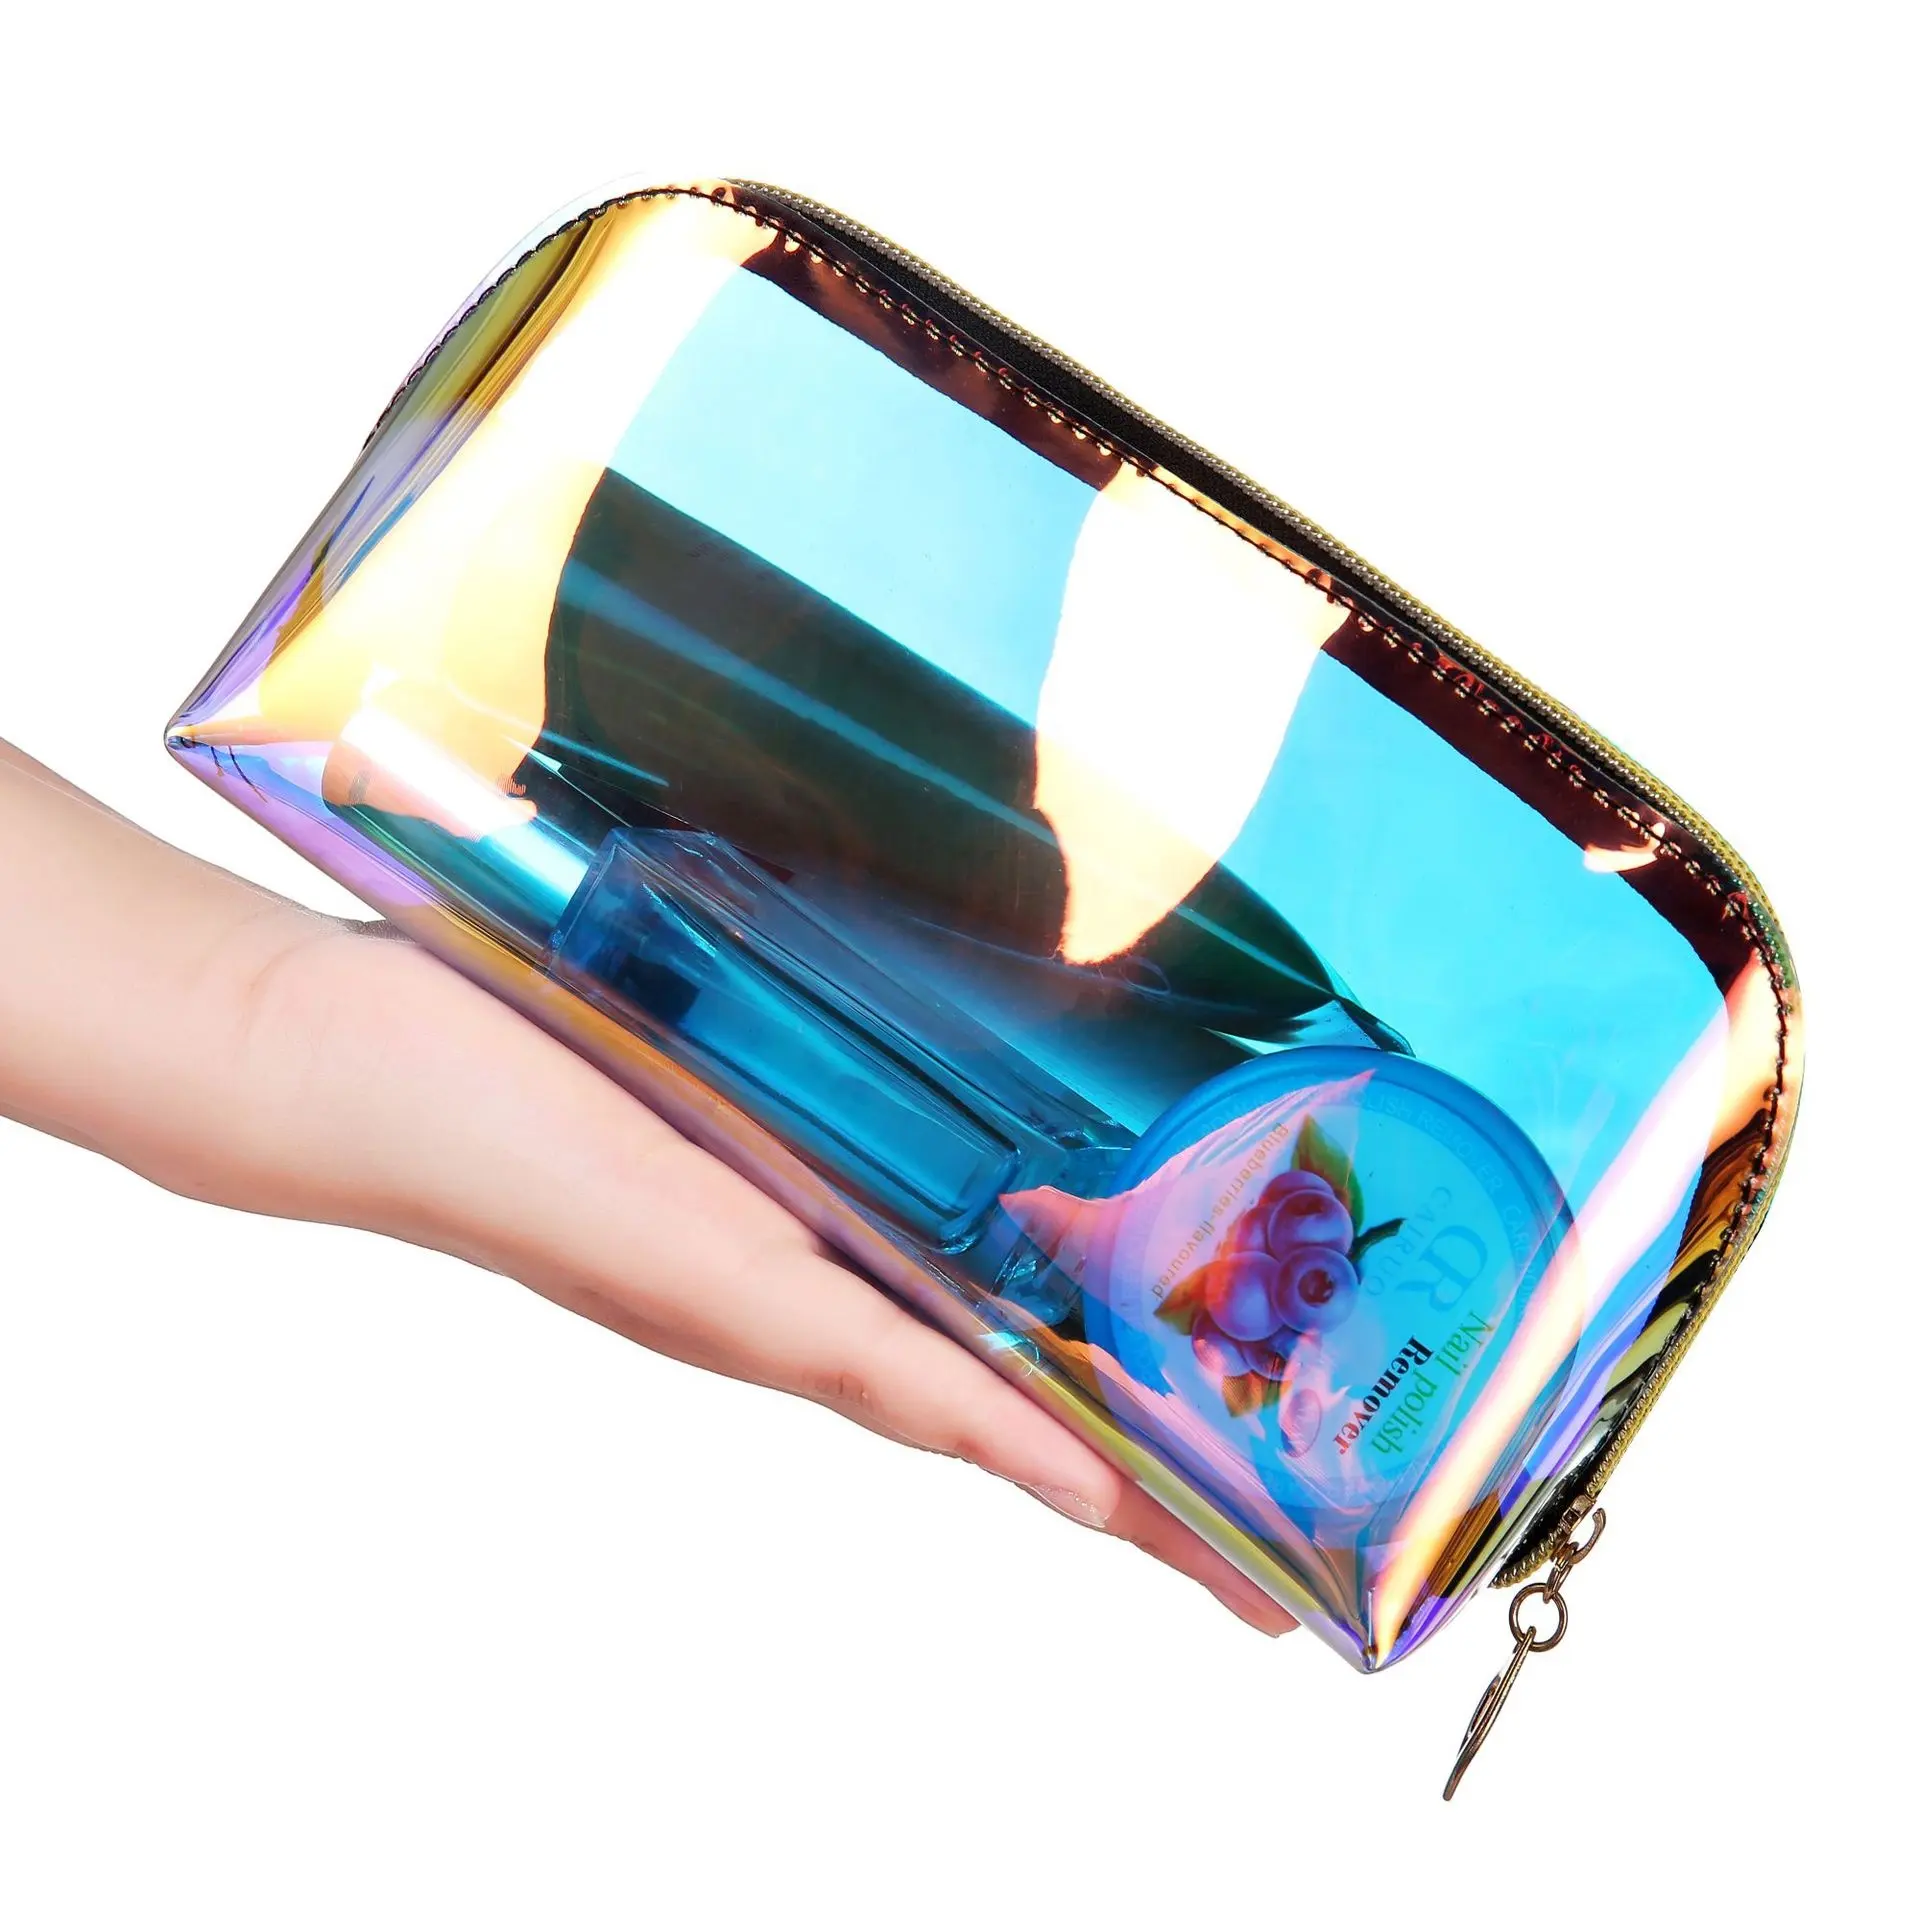 Travel Bag Print Clear Holographic Makeup Bag, Clear Transparent Holographic Make Up Pouch Pvc Cosmetic Bag For Women